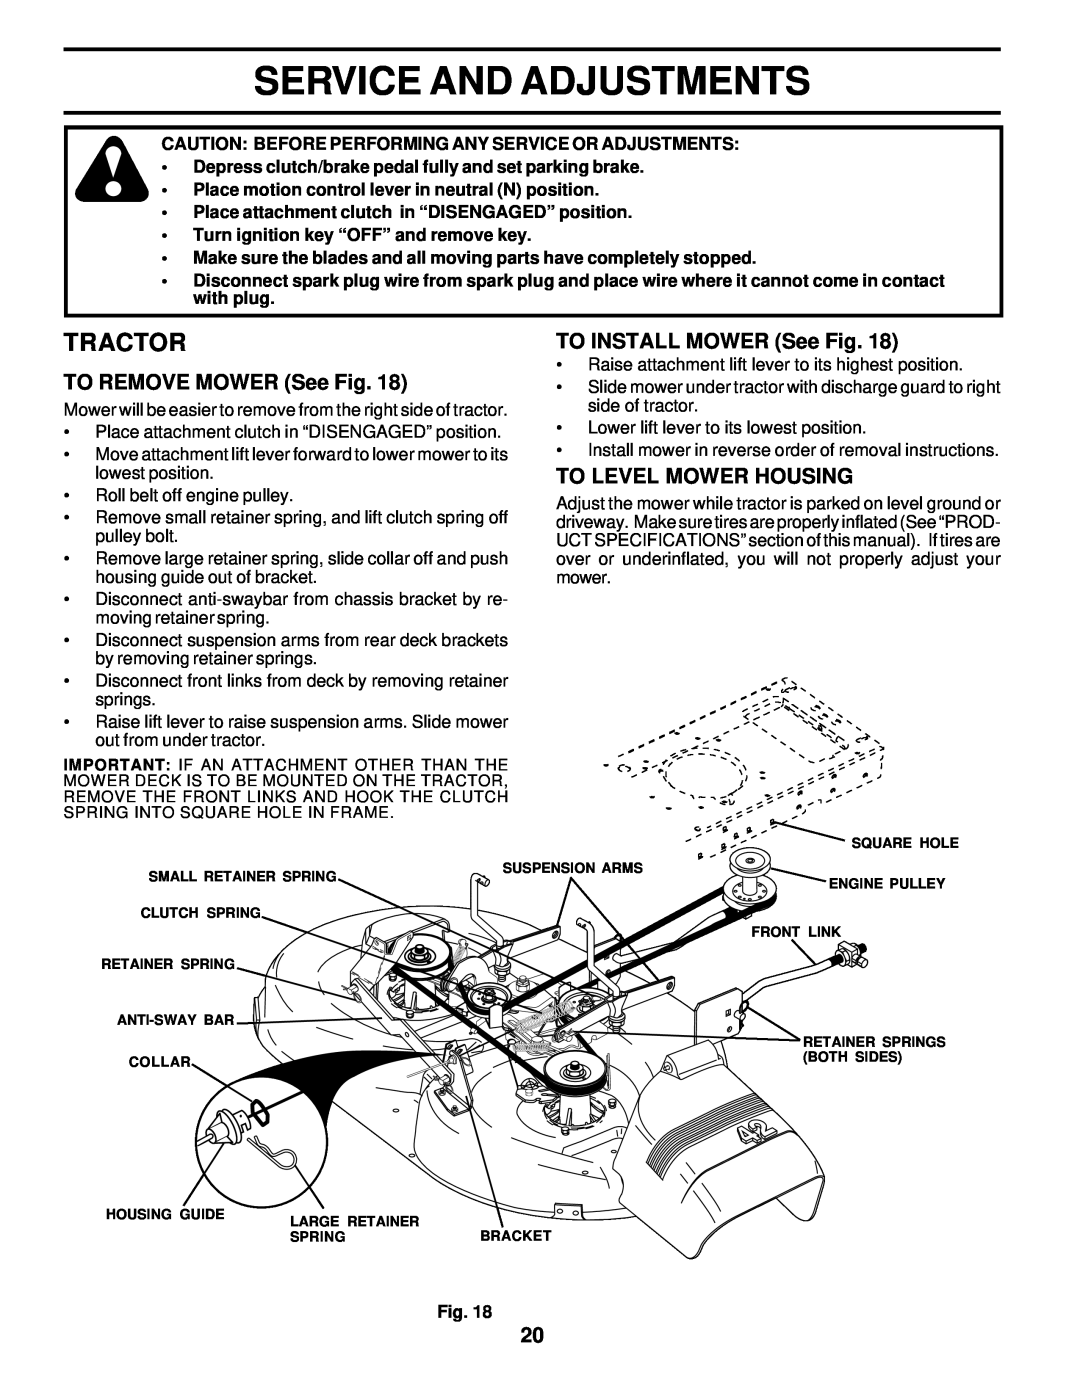 Poulan 178087 Service And Adjustments, TO REMOVE MOWER See Fig, TO INSTALL MOWER See Fig, To Level Mower Housing, Tractor 